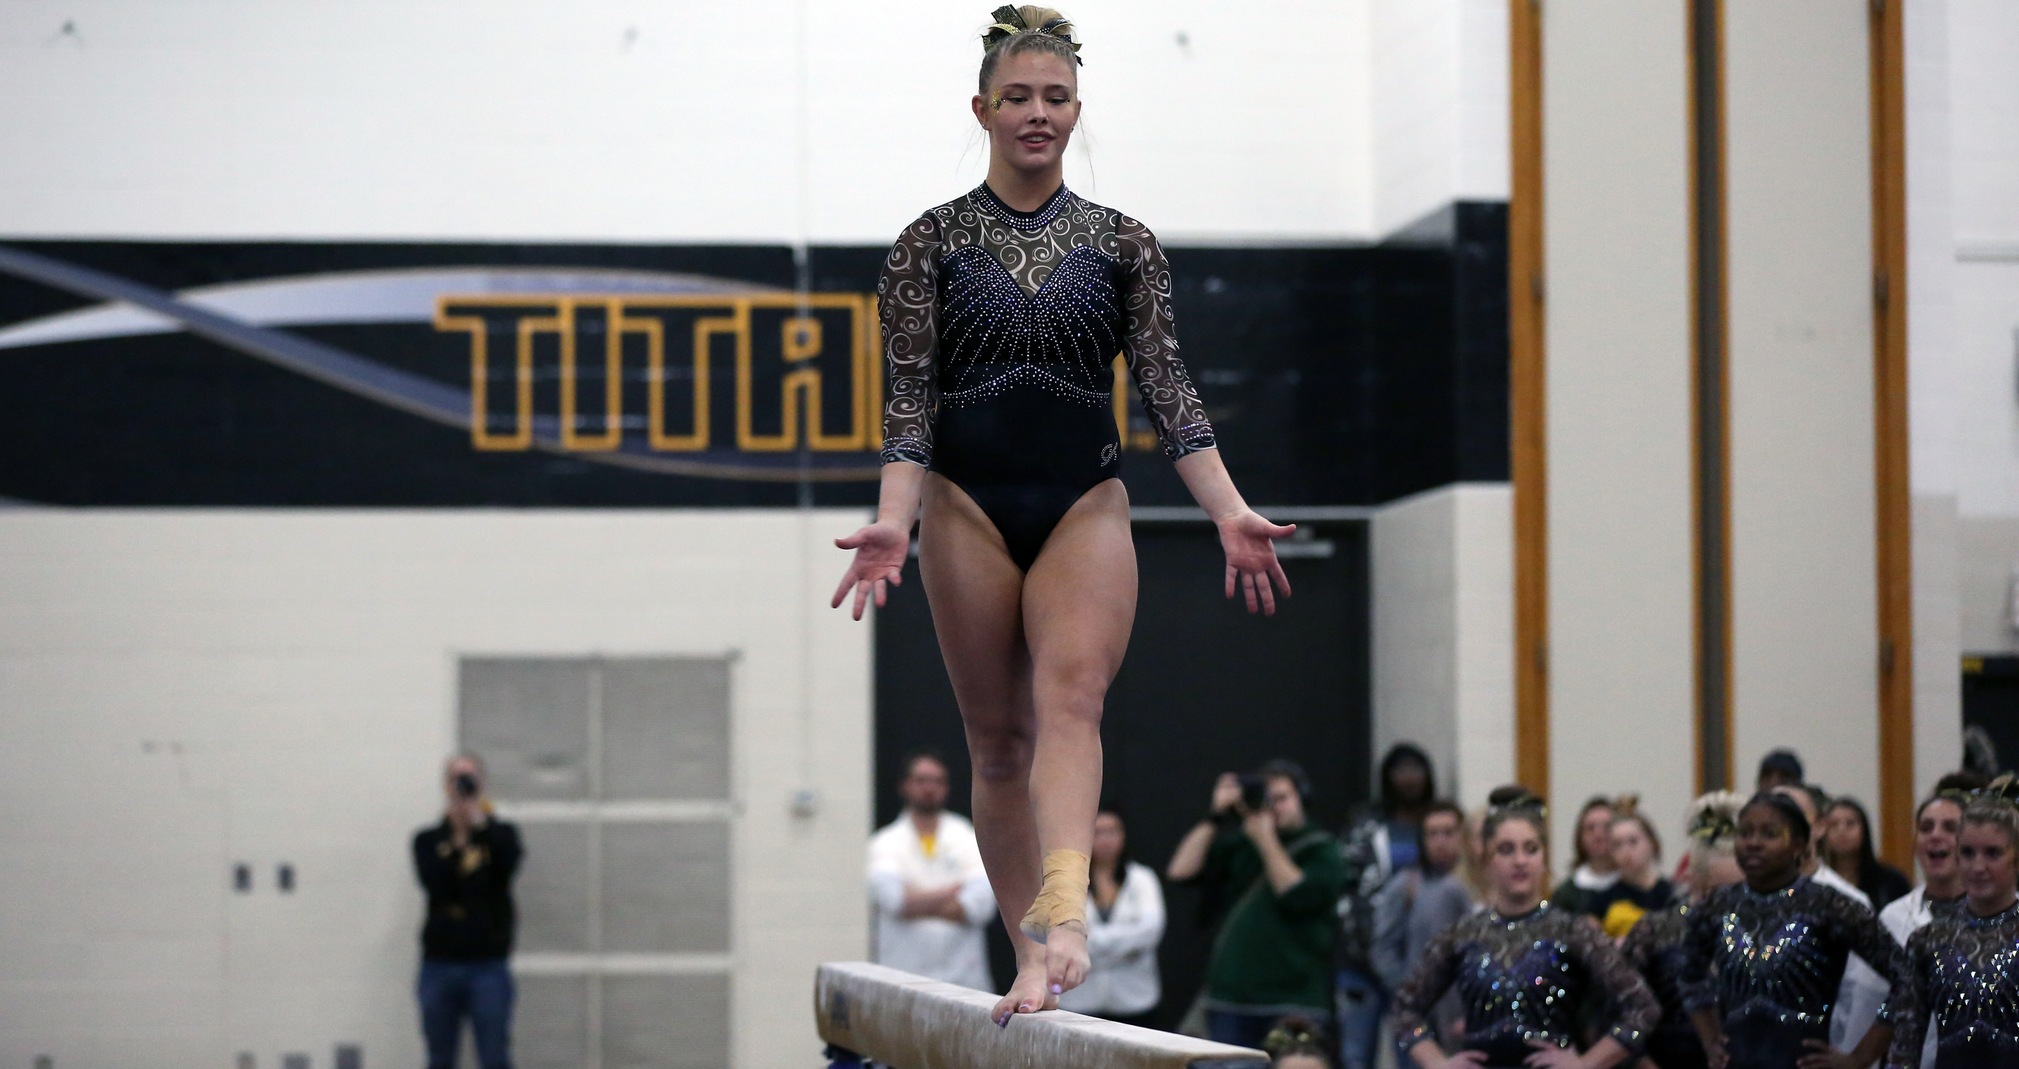 Kaira Hammond recorded a winning score on the balance beam while finishing sixth on the uneven bars against the Eagles.